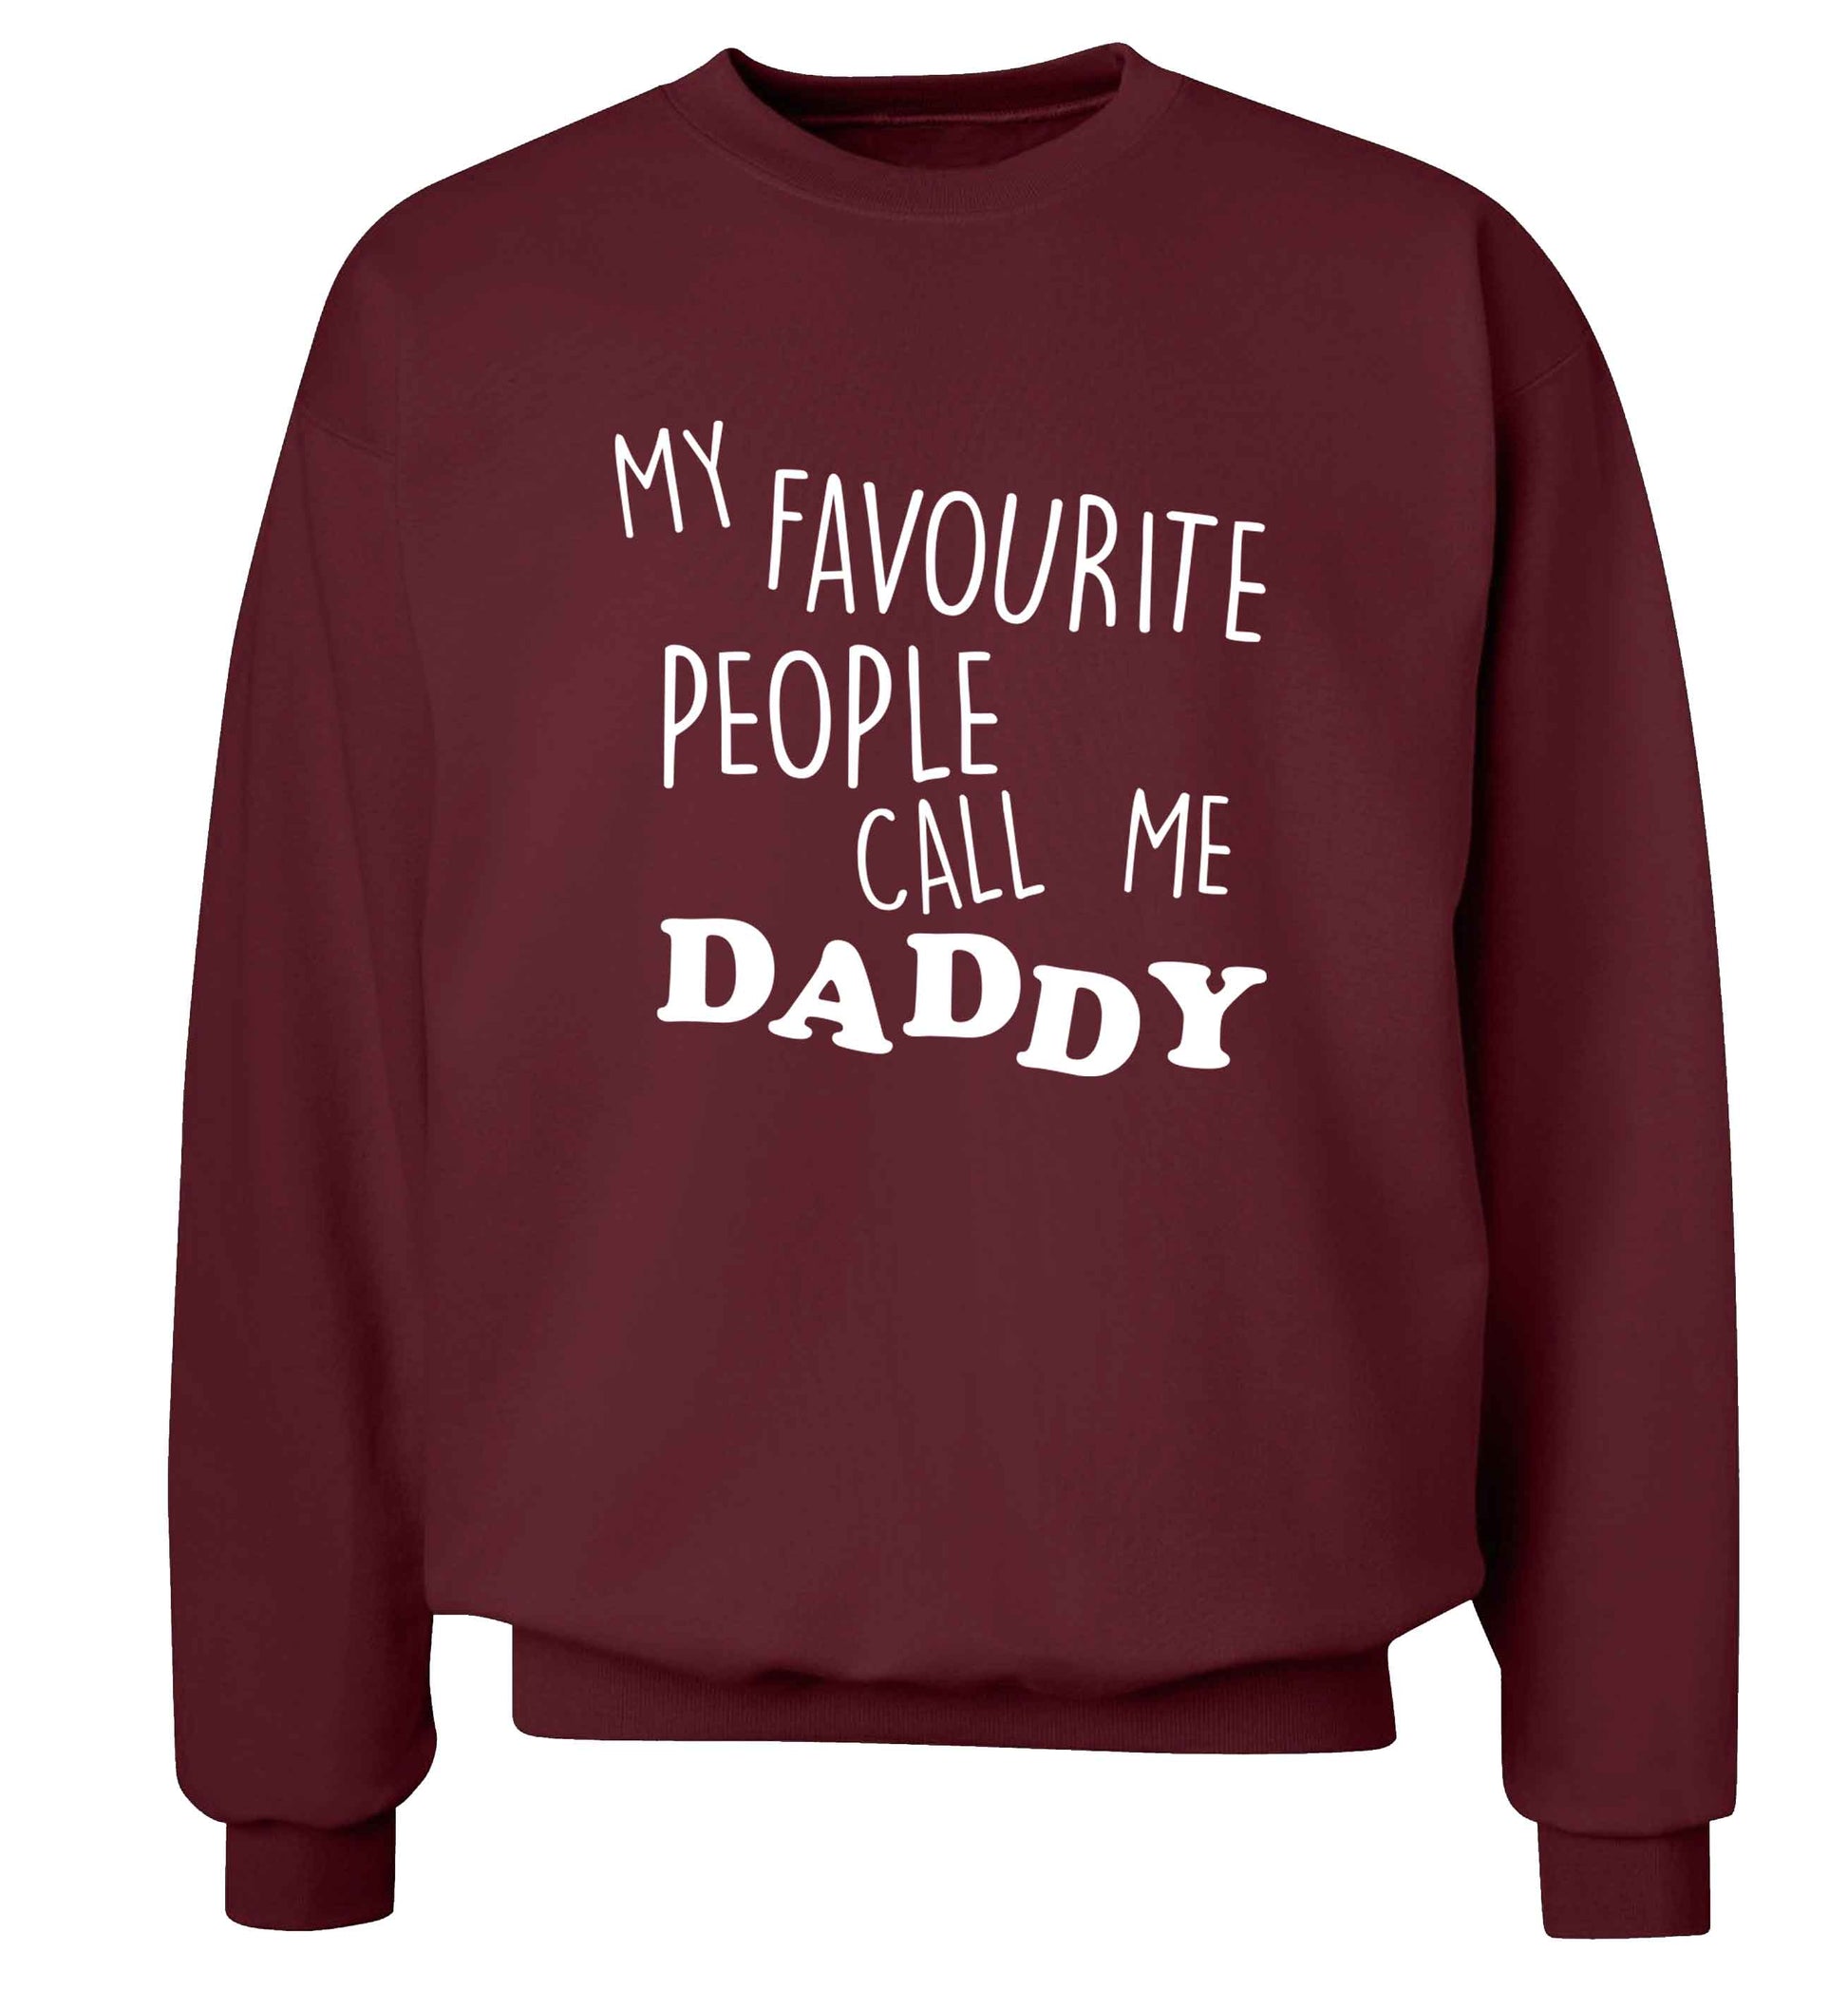 My favourite people call me daddy adult's unisex maroon sweater 2XL